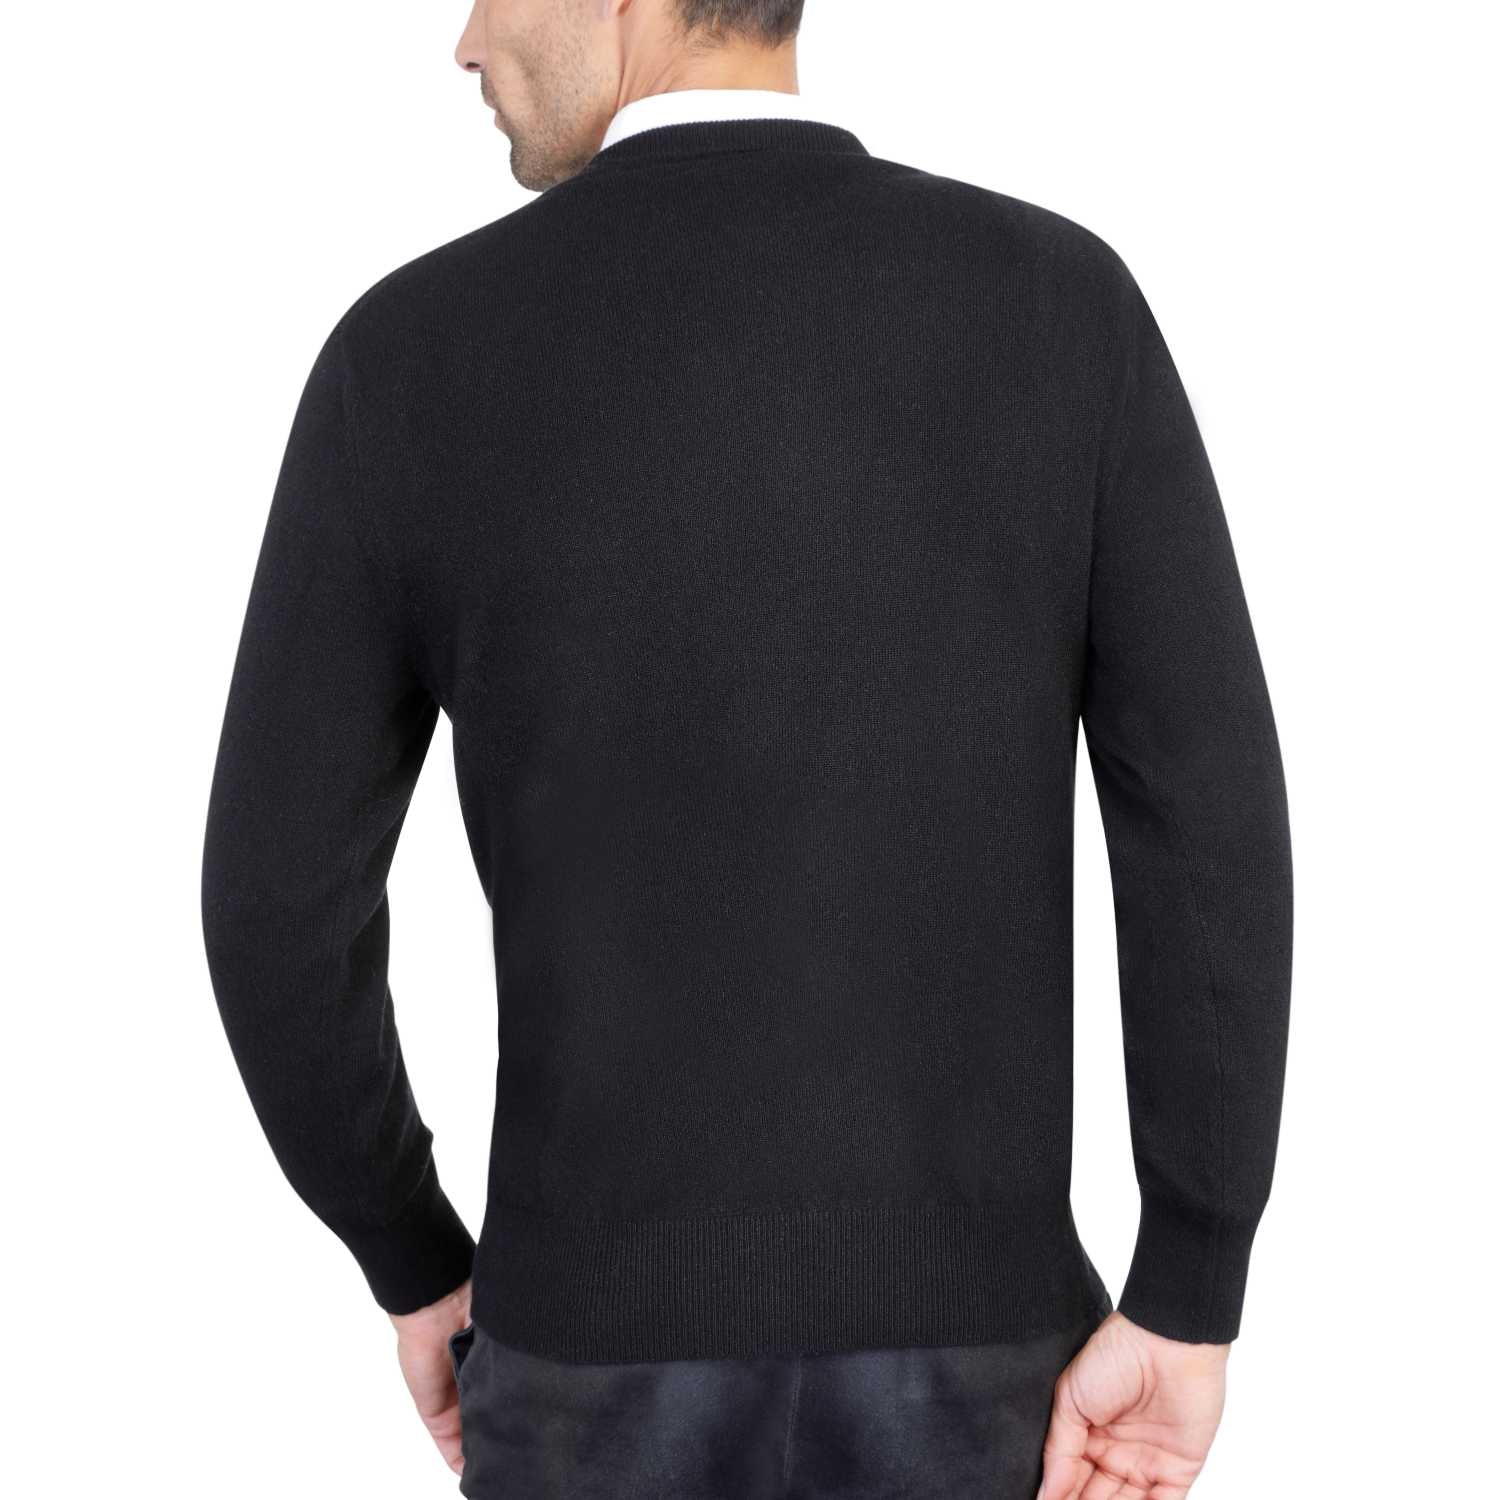 Mens Black Cashmere Round Neck Sweater | Back | Shop at The Cashmere Choice | London